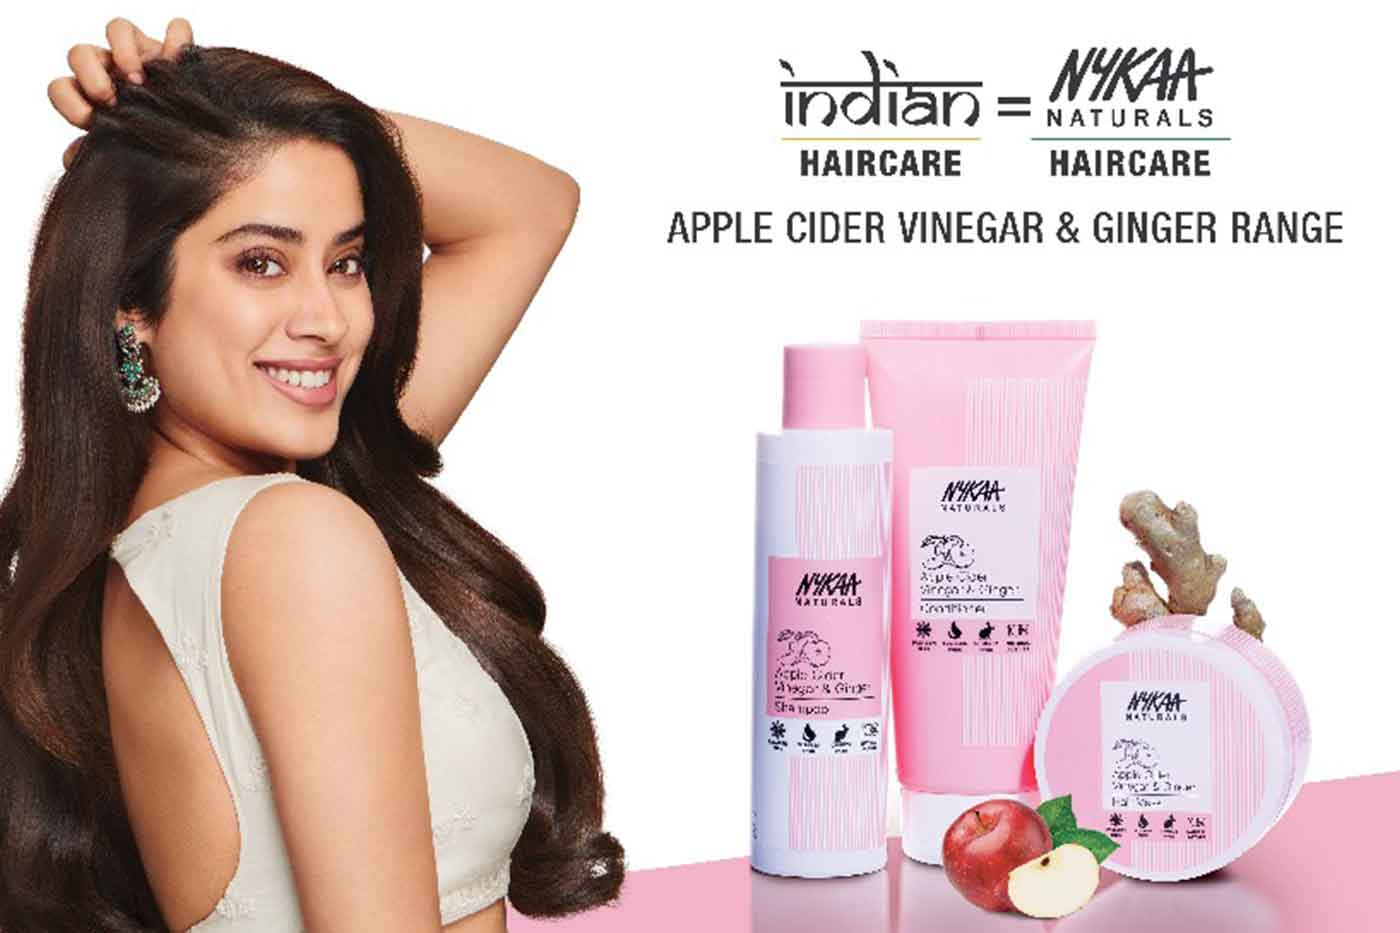 Janhvi Kapoor features in Nykaa Naturals Hair campaign